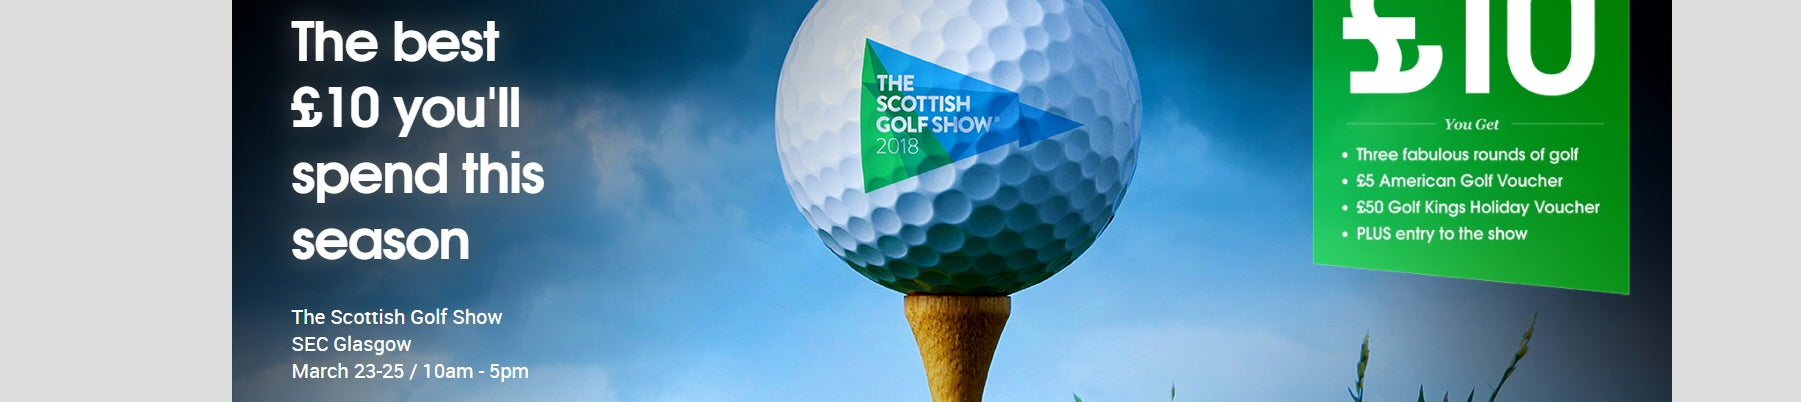 Take a 'Vertical Selfie' at Scottish Golf Show 2018 - and win the 5 Wood!